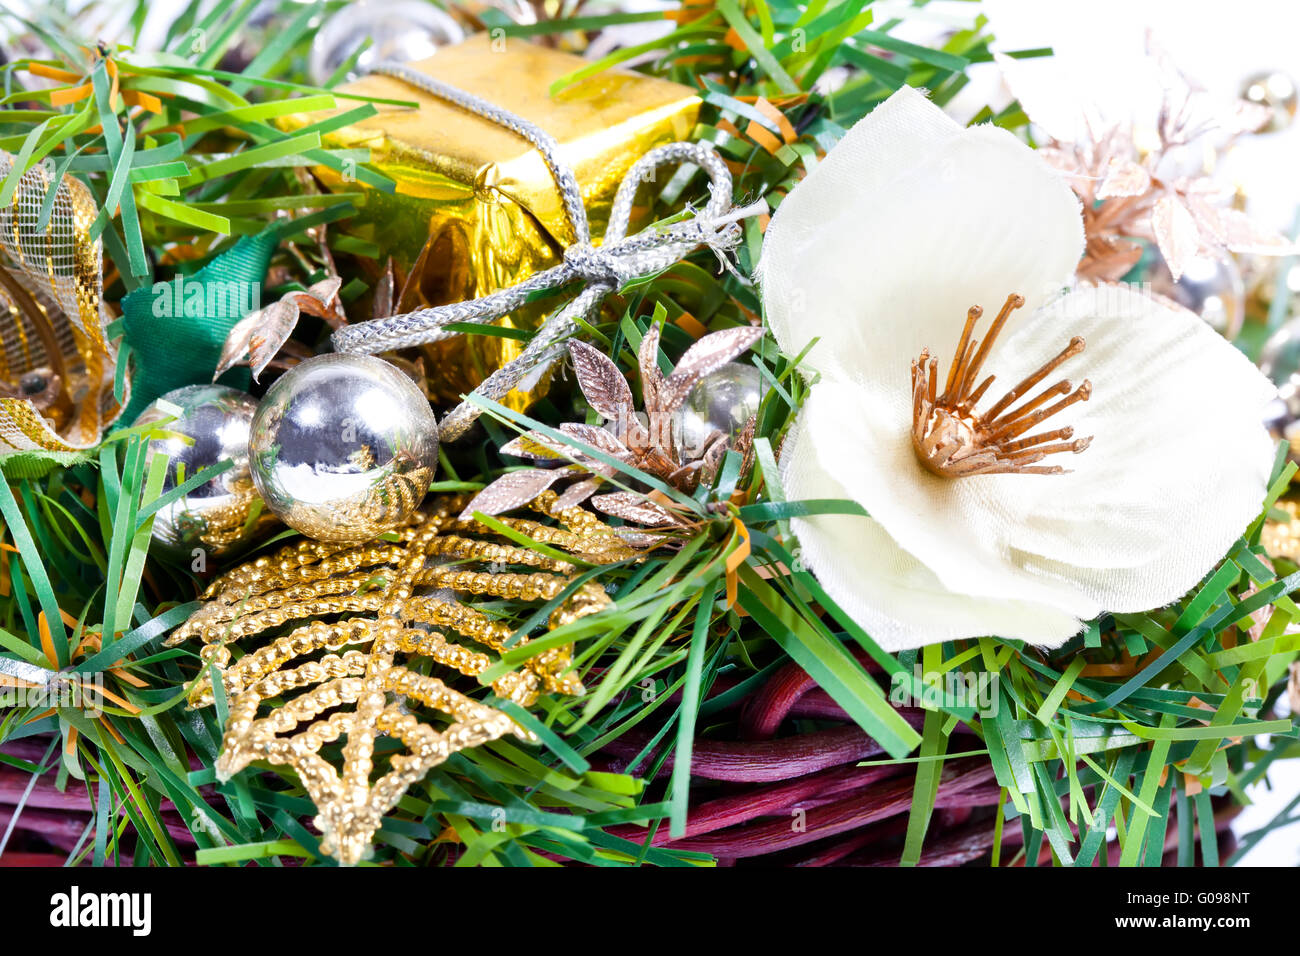 New Year composition with flower, leaves and beads in basket Stock Photo